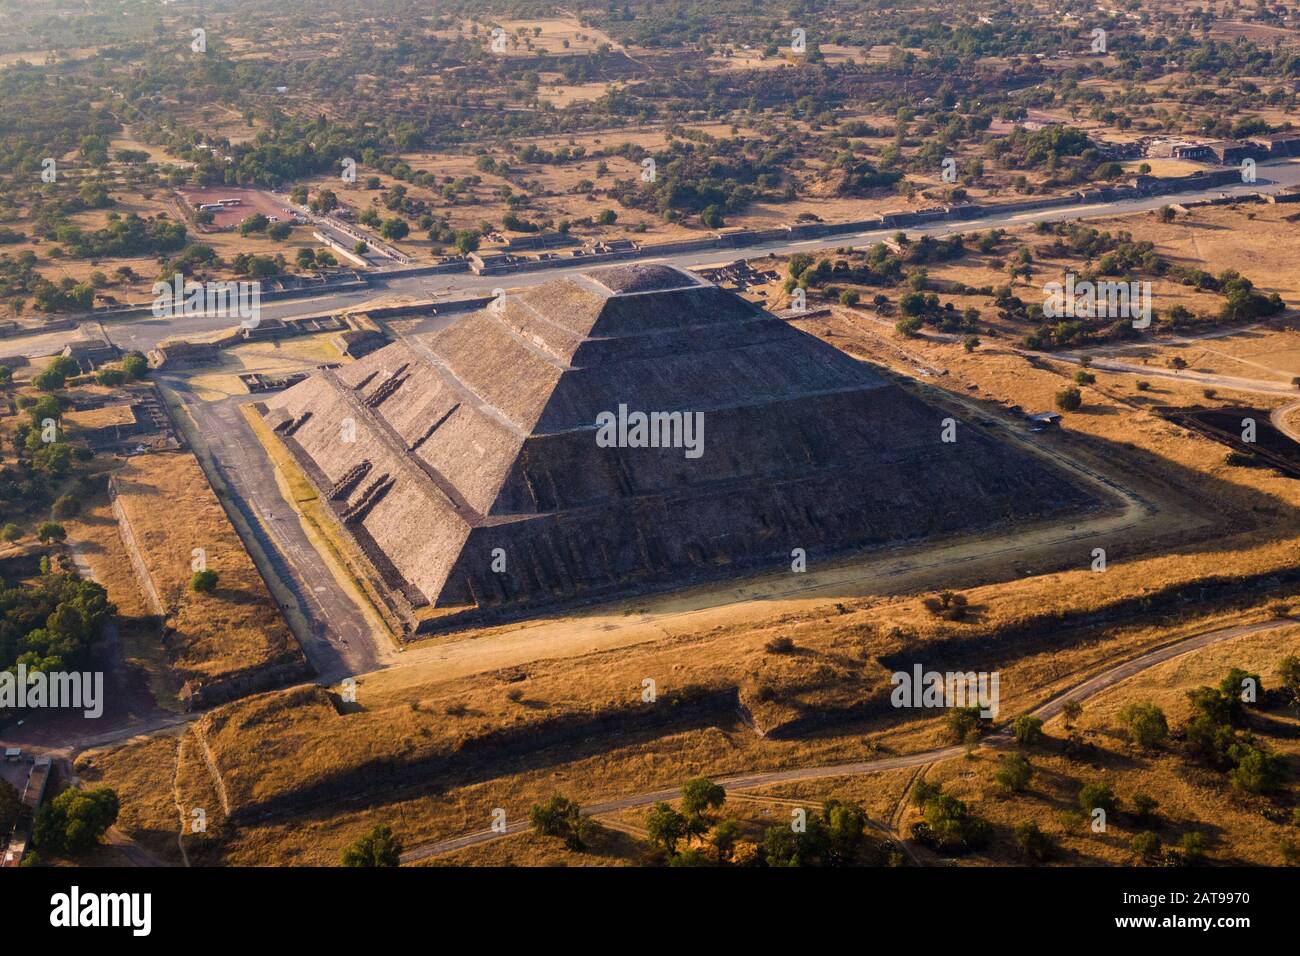 Aerial view of the Pyramid of the Sun at sunset at the ancient Aztec city of Teotihuacan, Mexico. Stock Photo